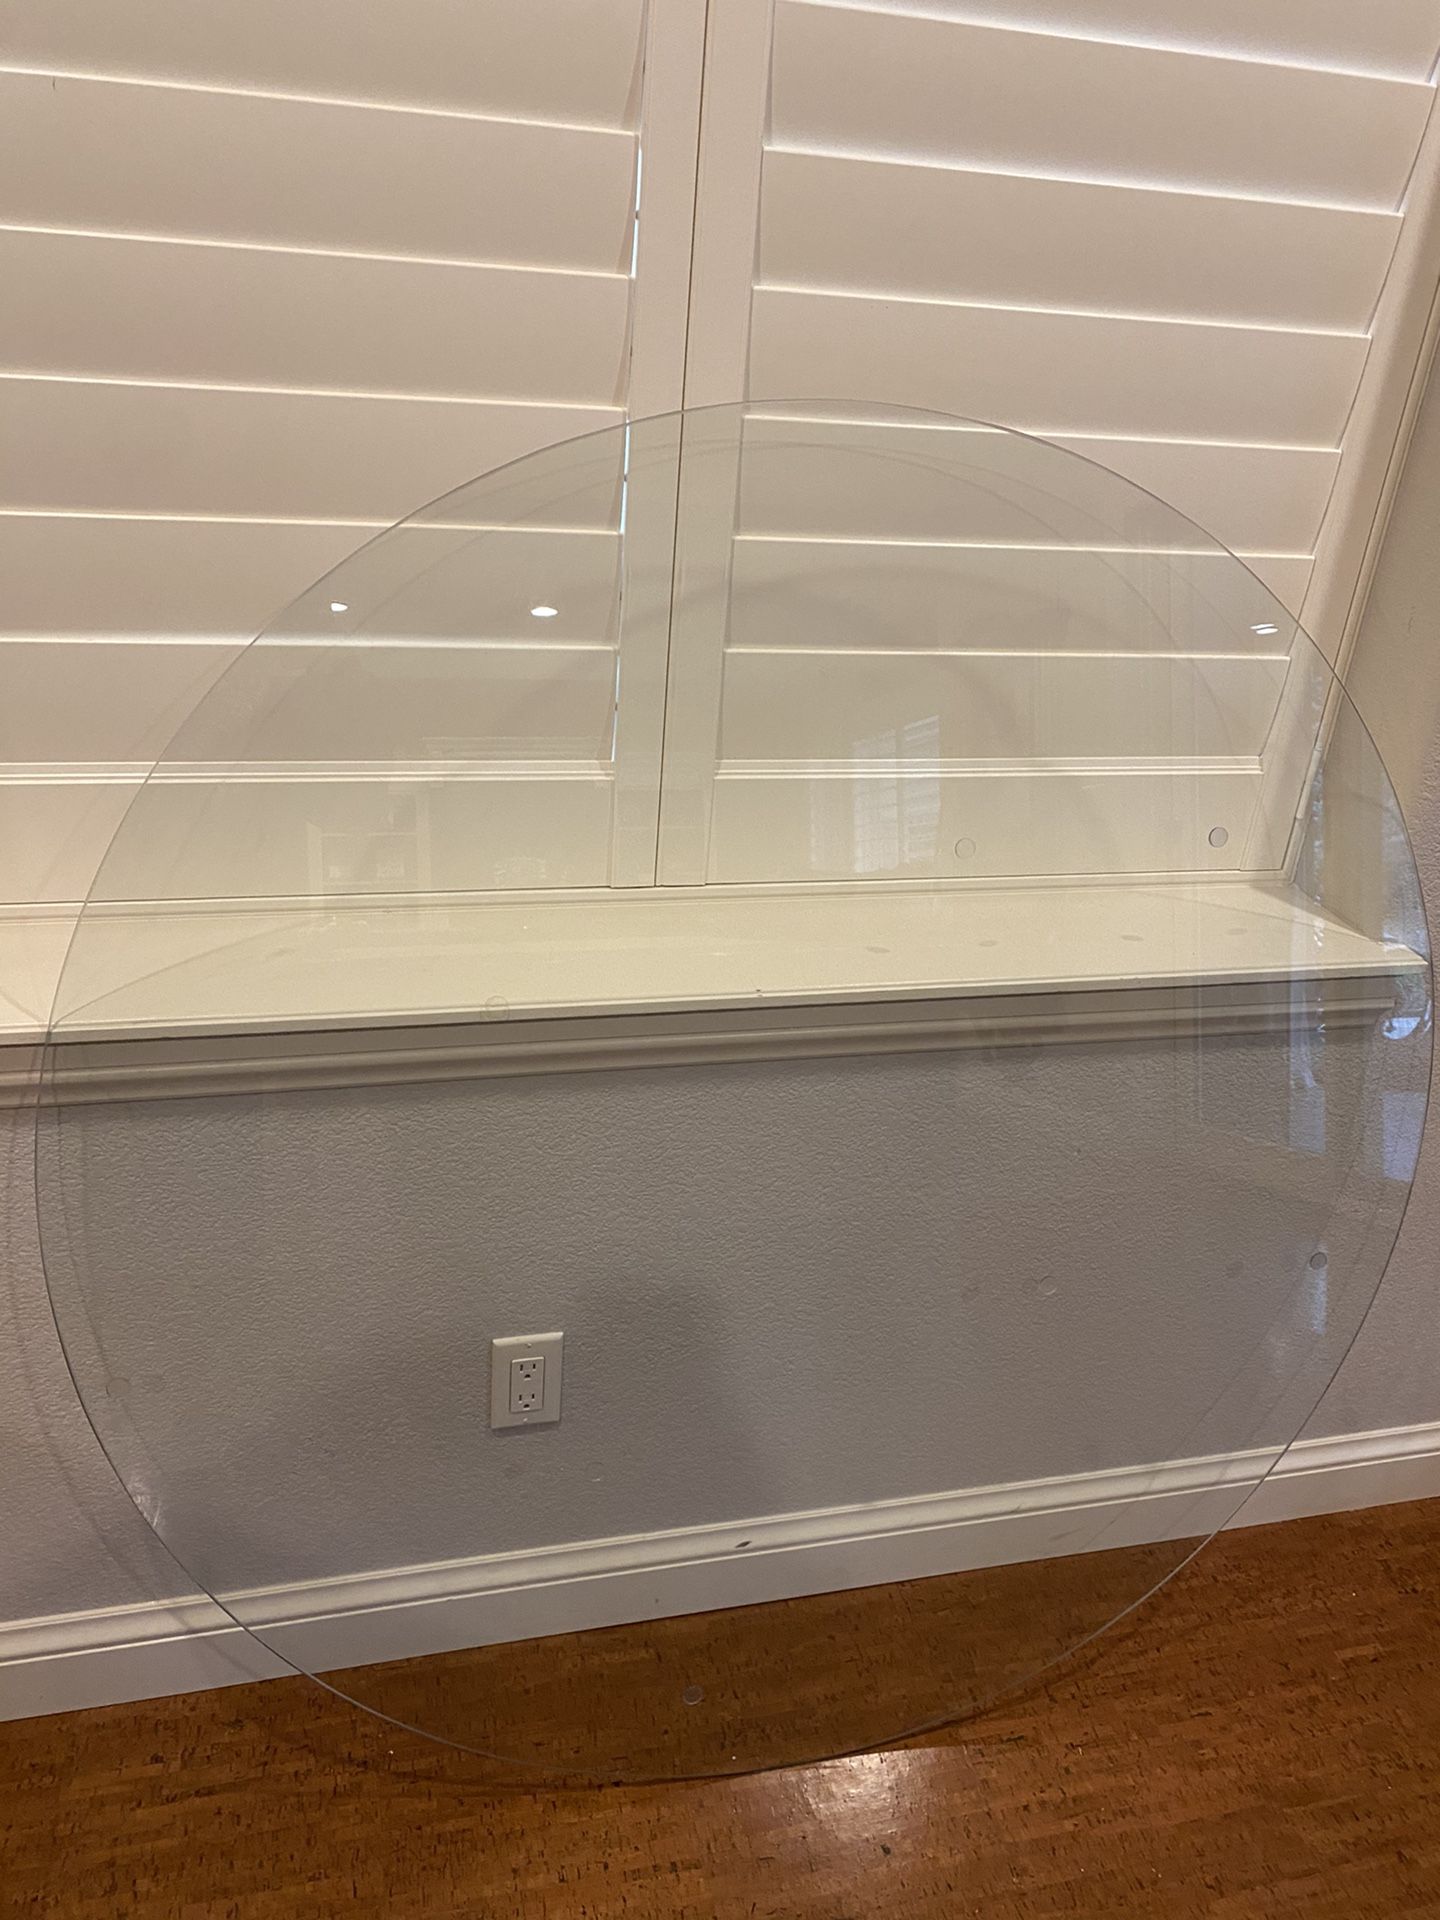 52” Glass Table Top 1/4” thick high quality